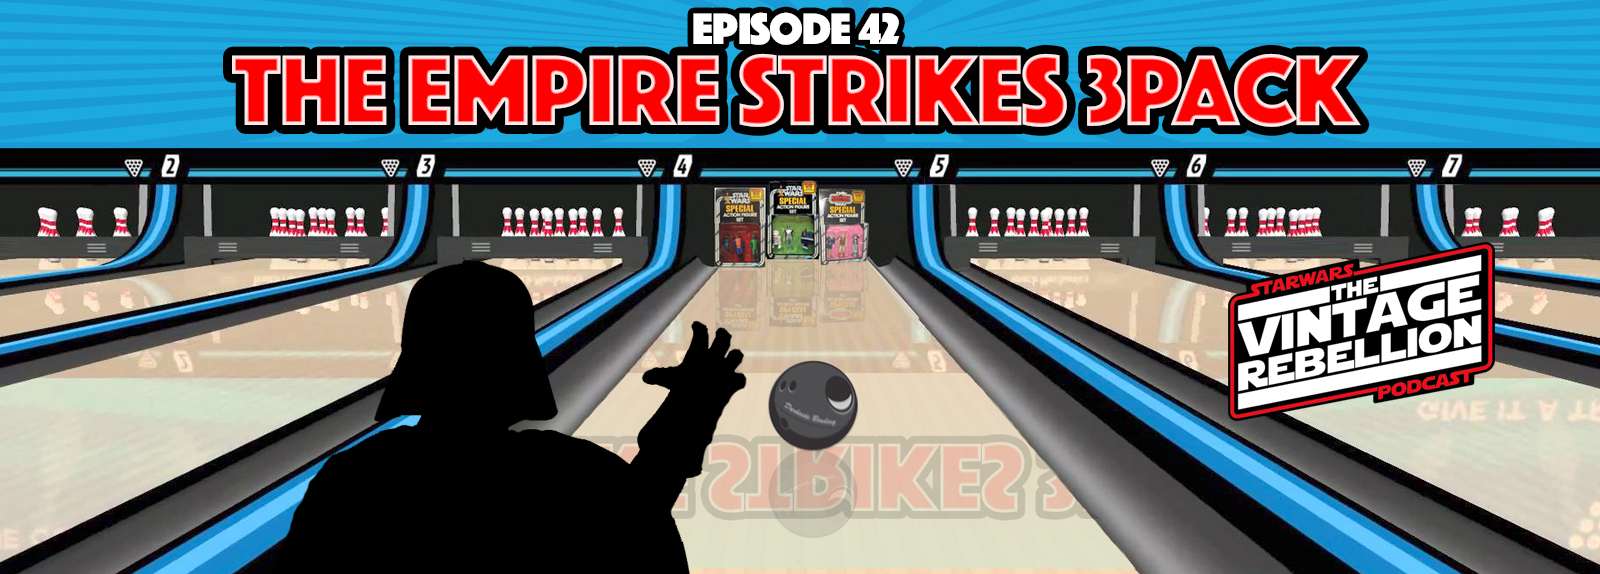 Episode 42 : The Empire Strikes 3 Pack